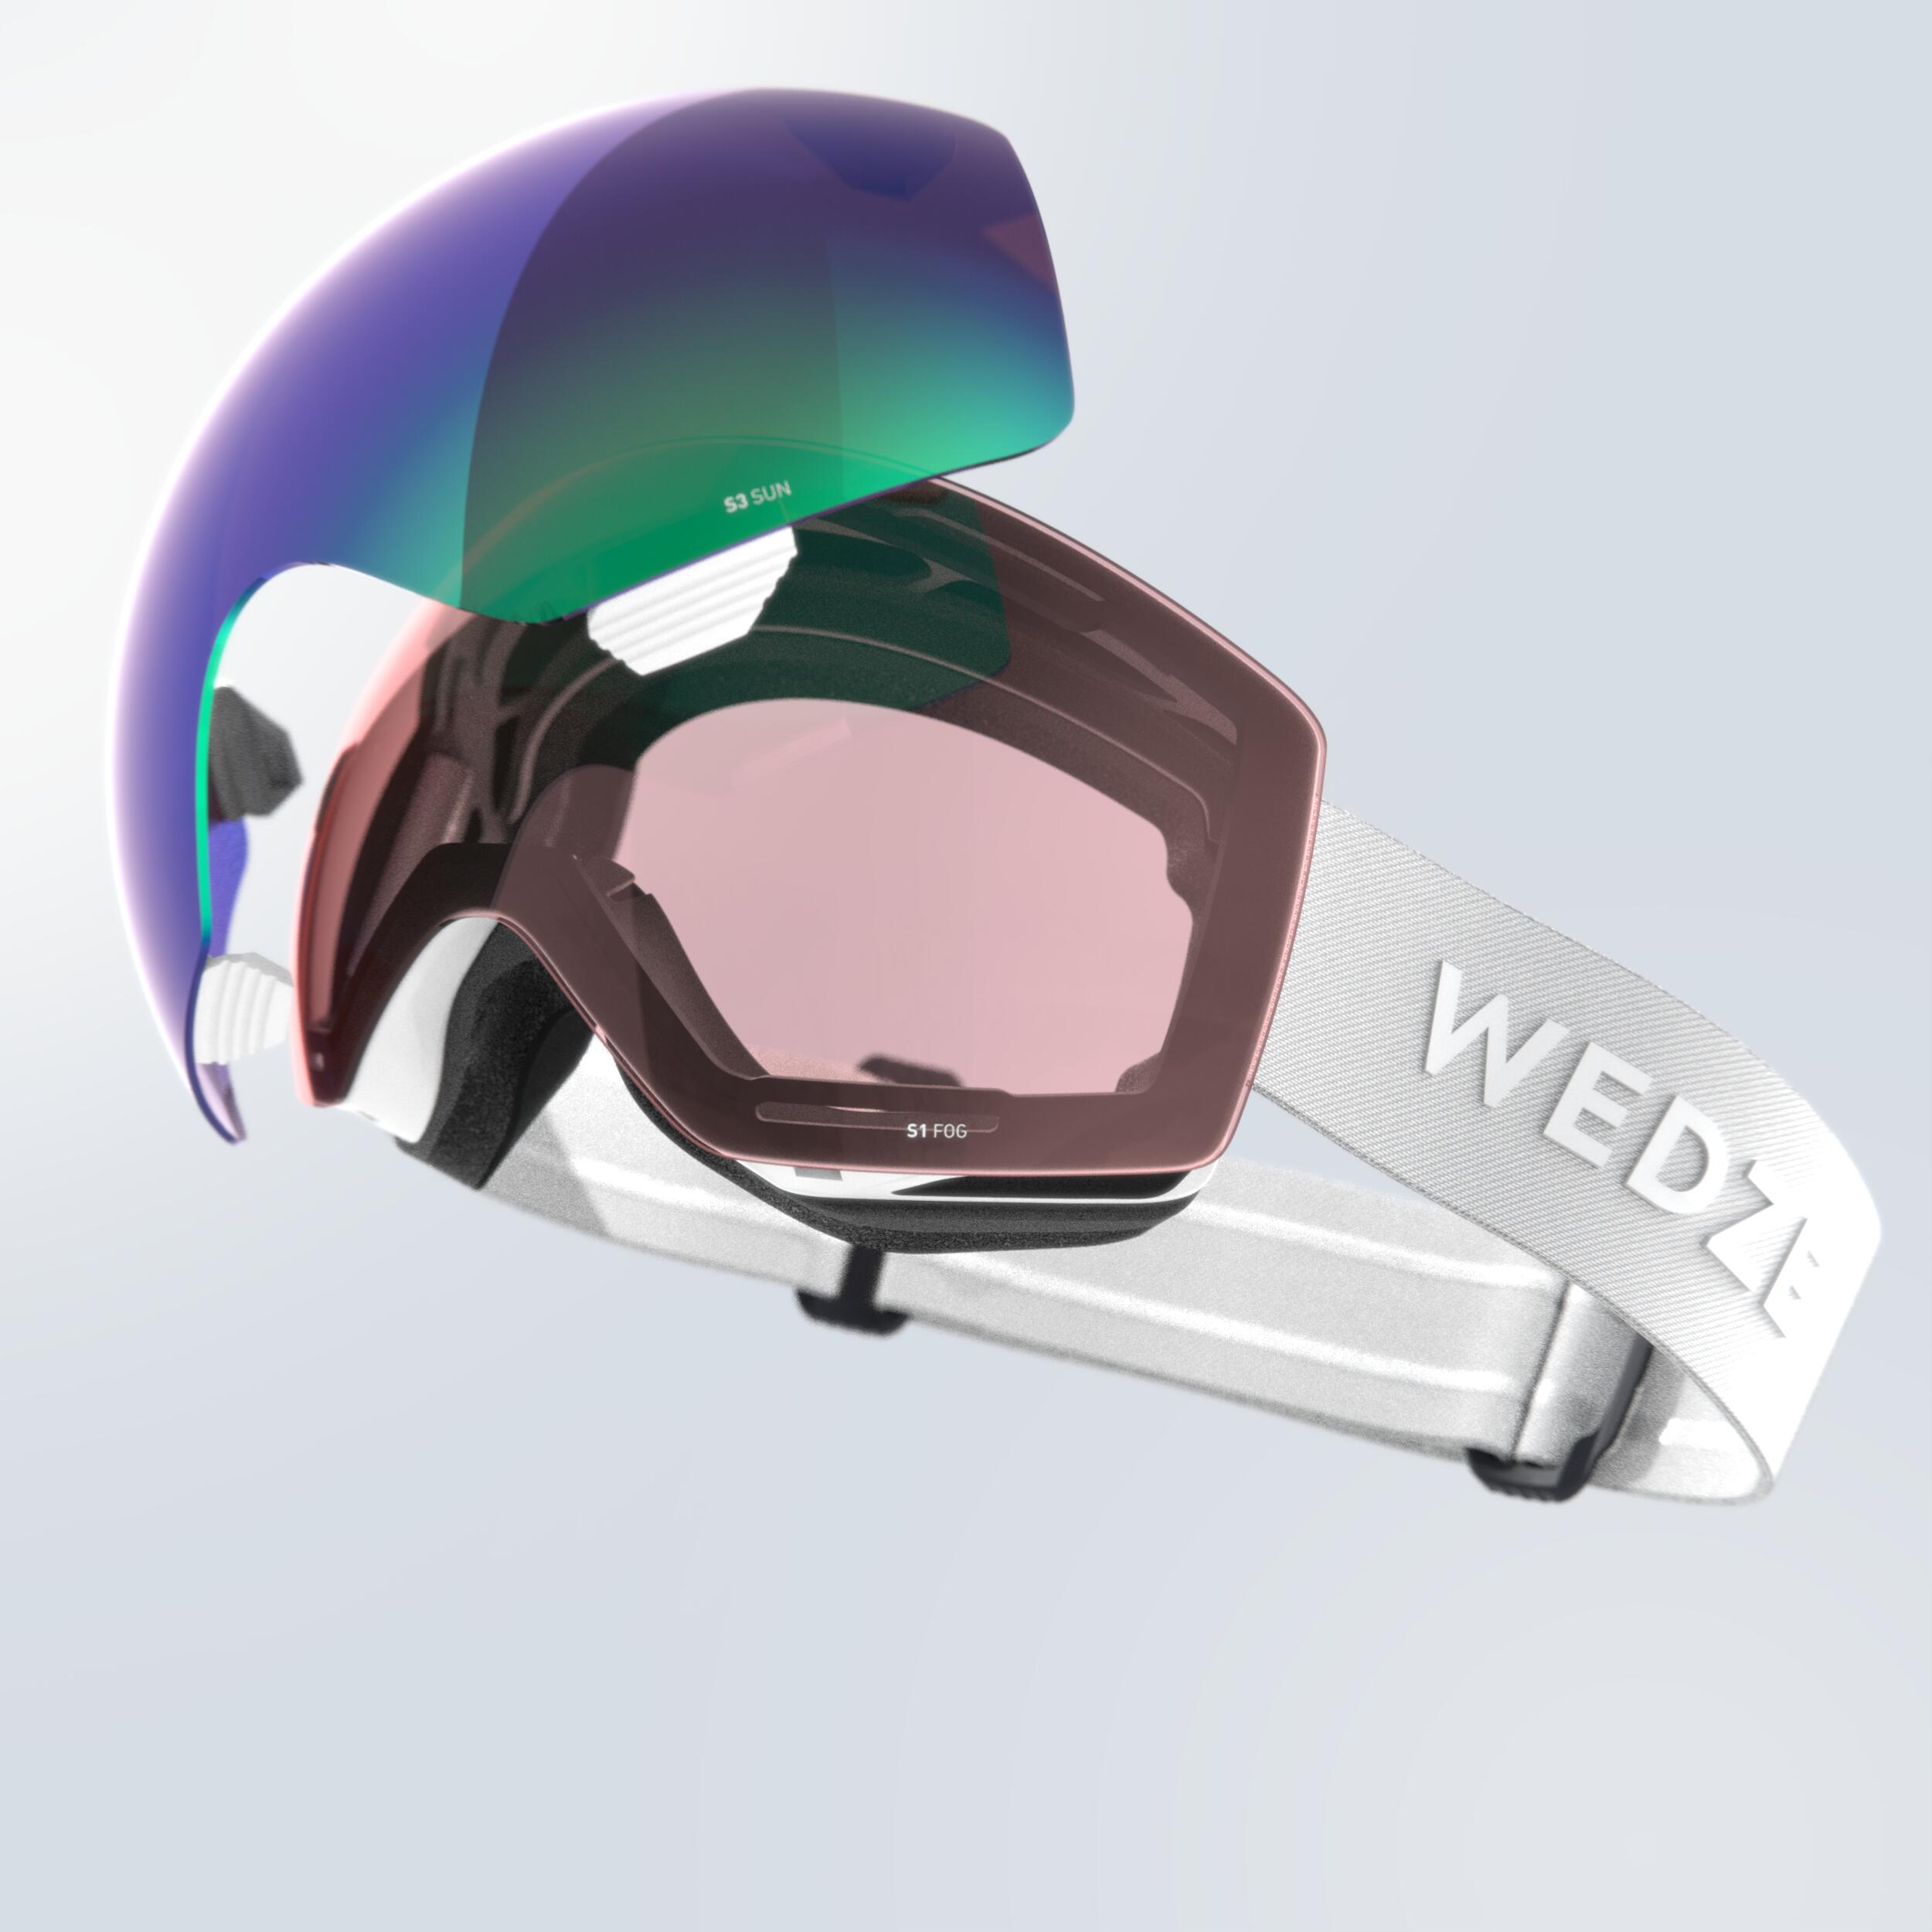 Adults and Kids Skiing and Snowboarding Goggles - G900 Snow White